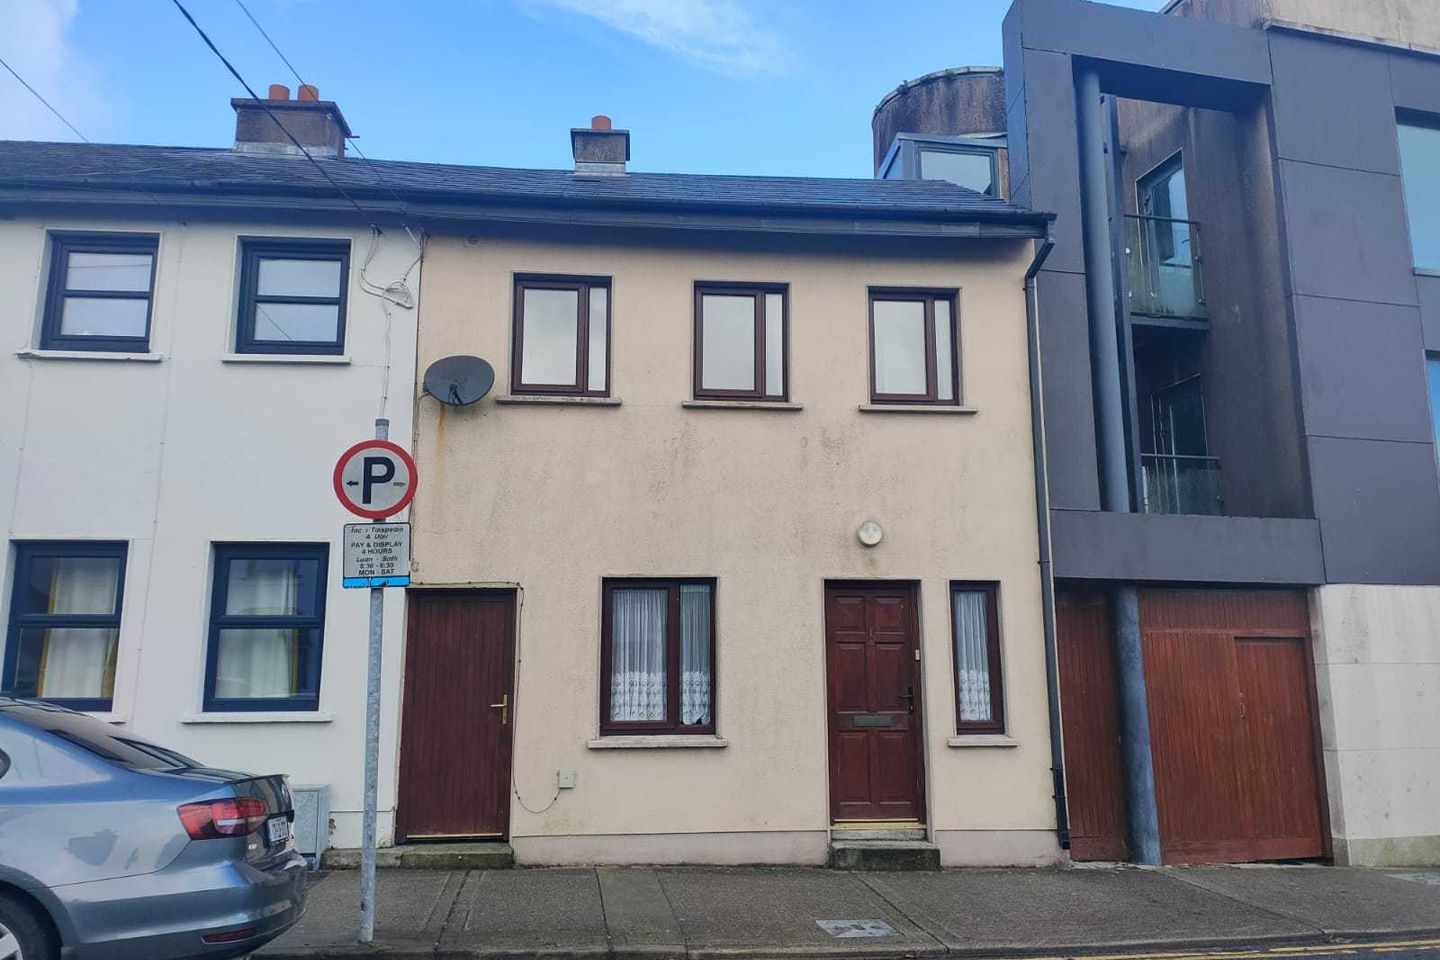 'St. Judes', 1A John's Road, Wexford Town, Co. Wexford, Y35RYW5